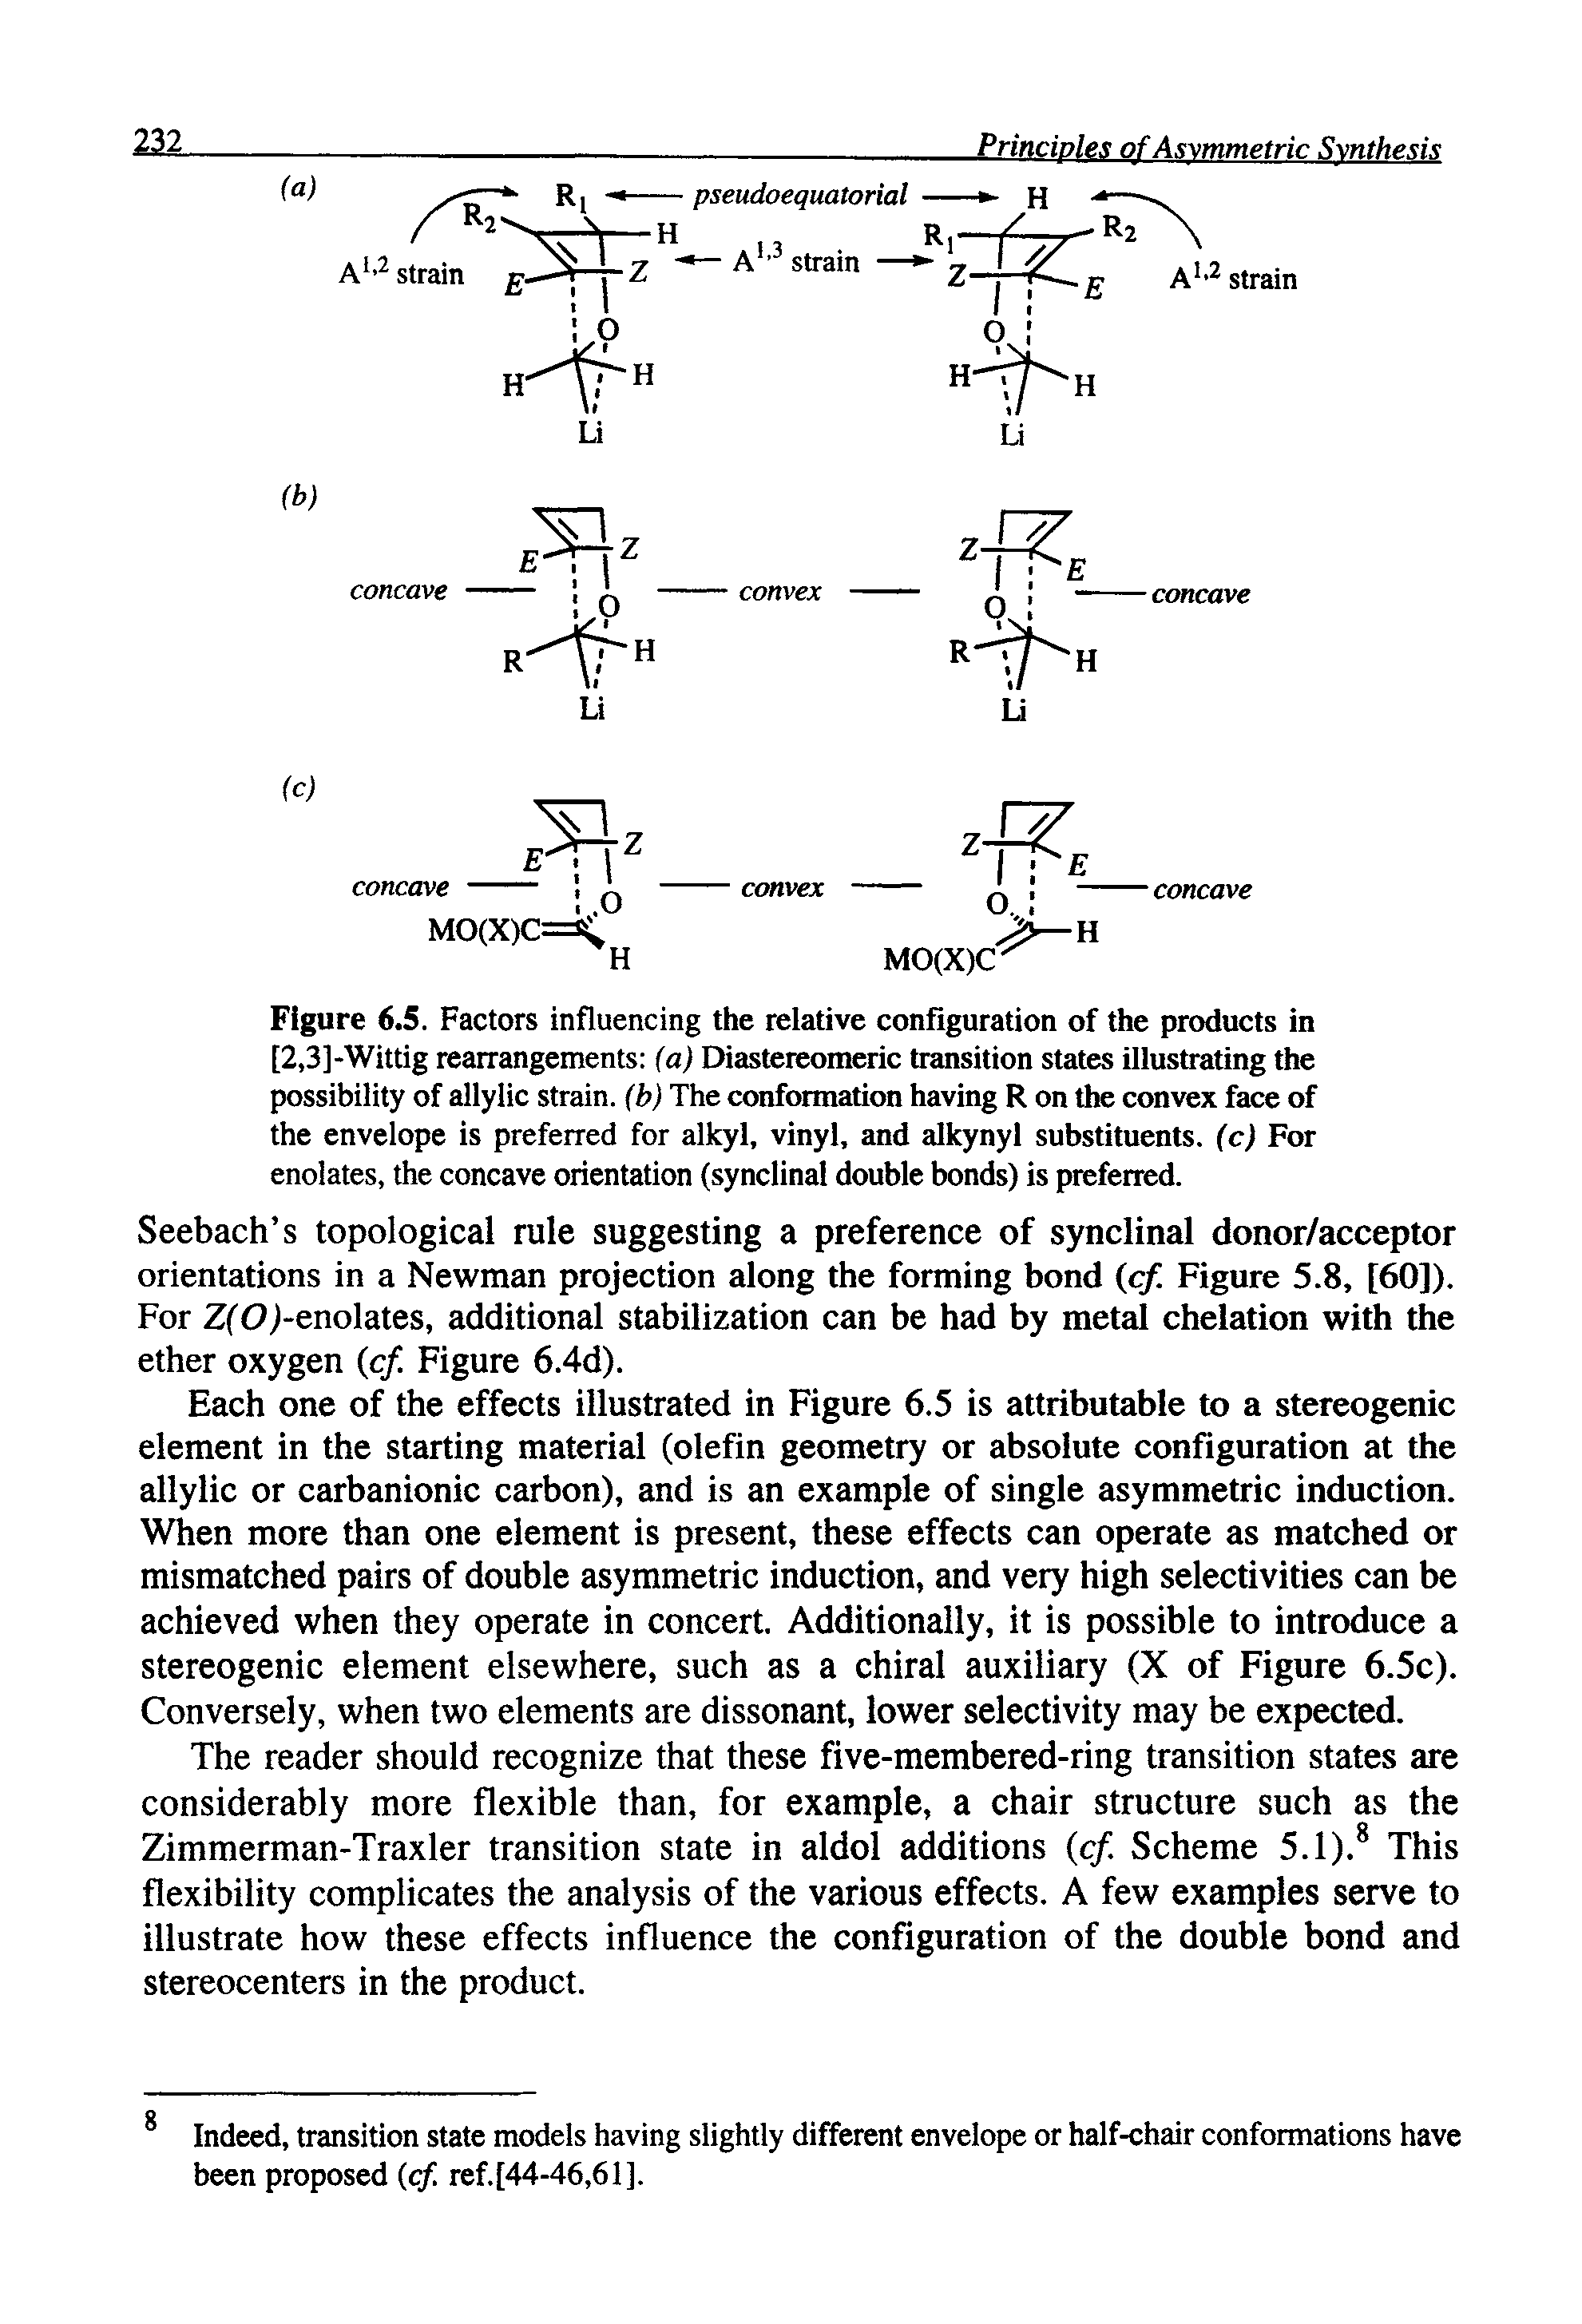 Figure 6.5. Factors influencing the relative configuration of the products in [2,3]-Wittig rearrangements (a) Diastereomeric transition states illustrating the possibility of allylic strain, (b) The conformation having R on the convex face of the envelope is preferred for alkyl, vinyl, and alkynyl substituents, (c) For enolates, the concave orientation (synclinal double bonds) is preferred.